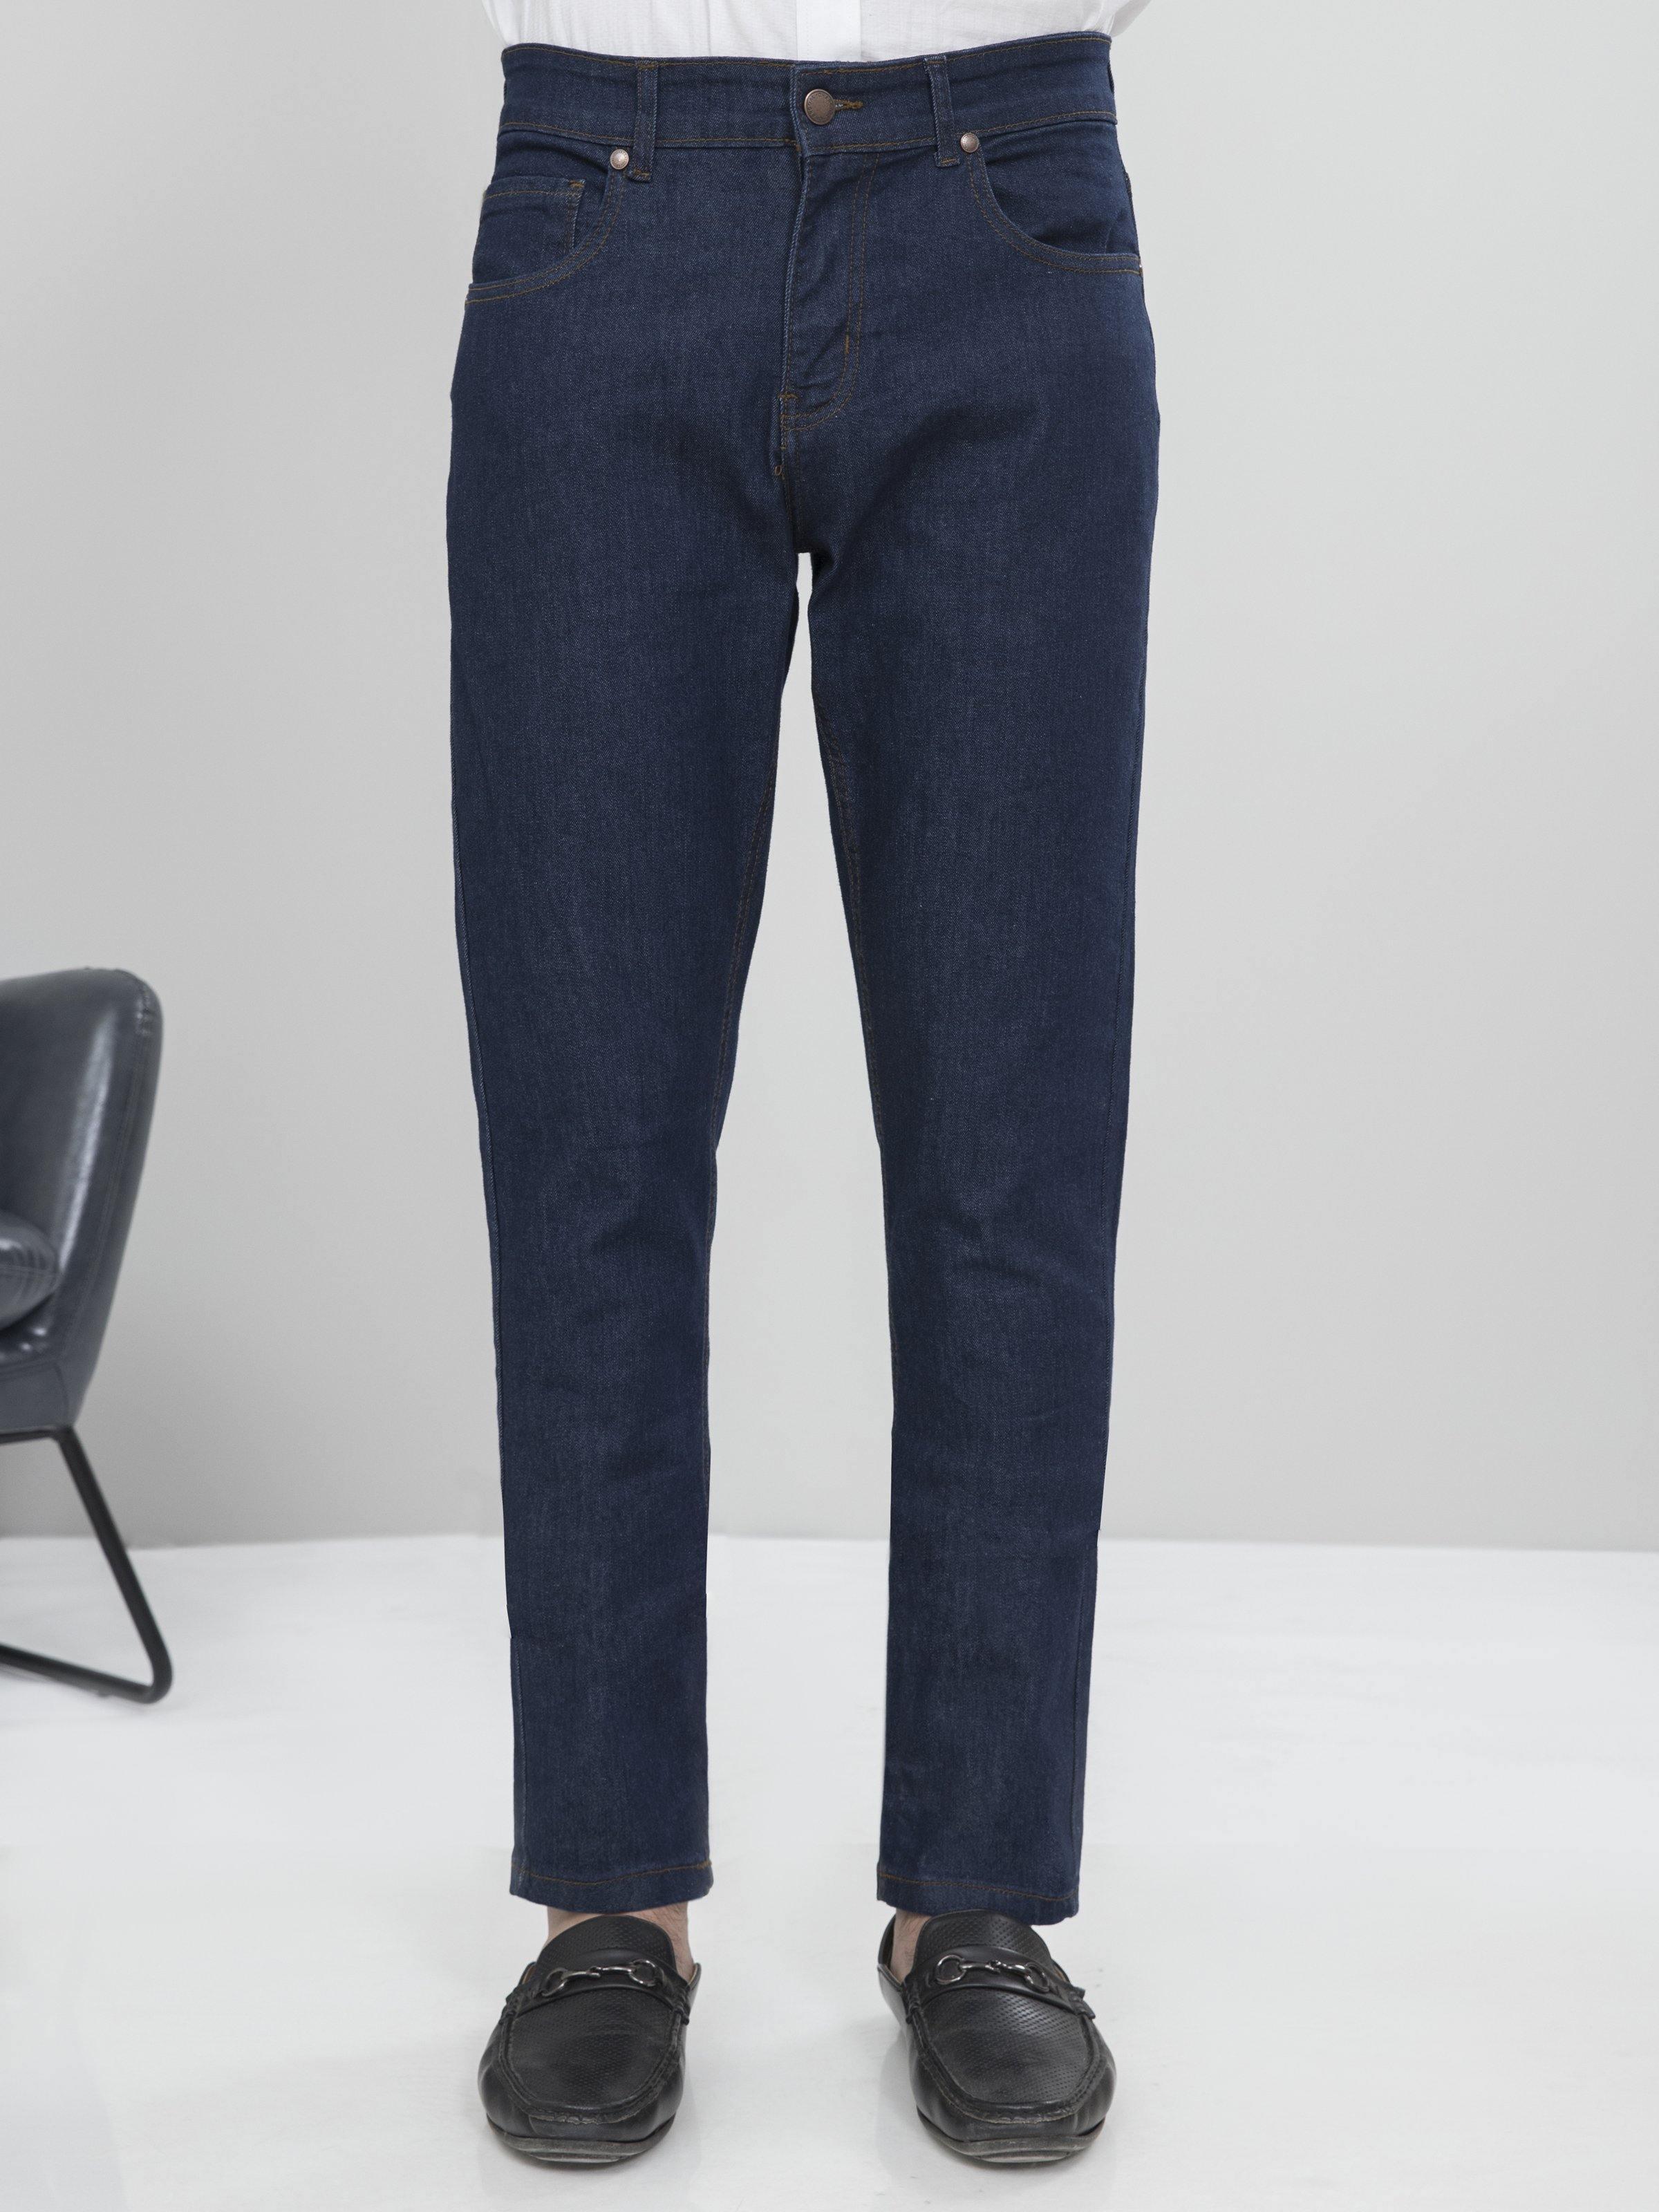 DENIM SLIM FIT JEANS NAVY at Charcoal Clothing